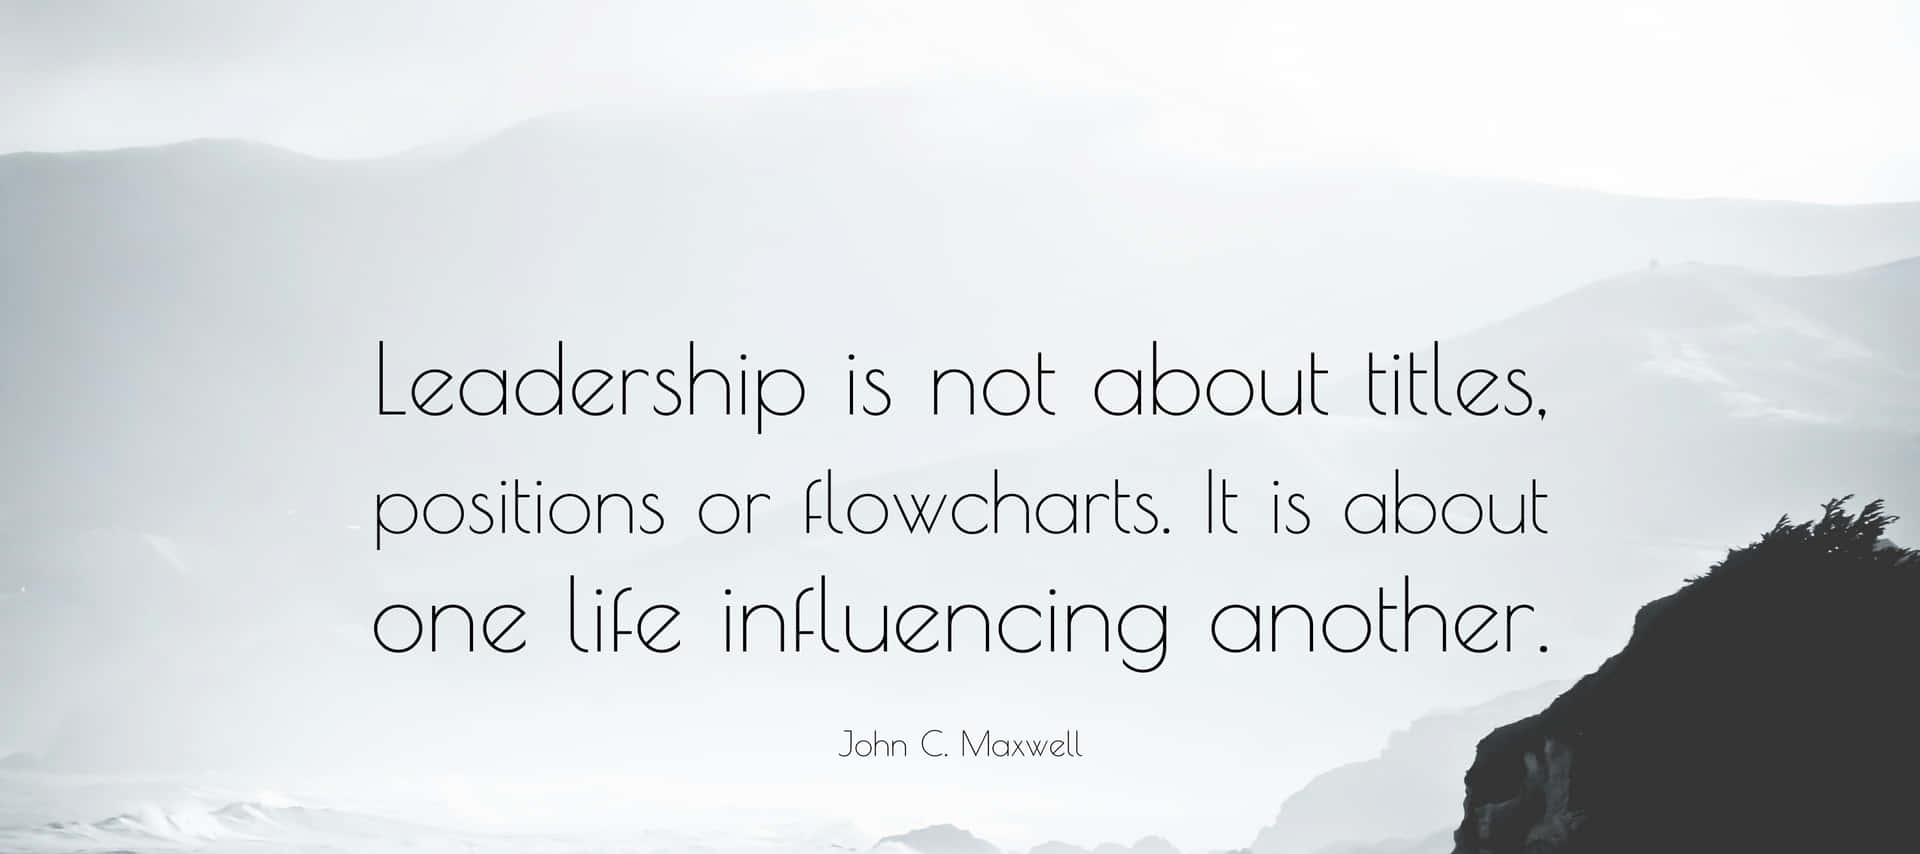 Influential Leadership Quoteby John C Maxwell Wallpaper